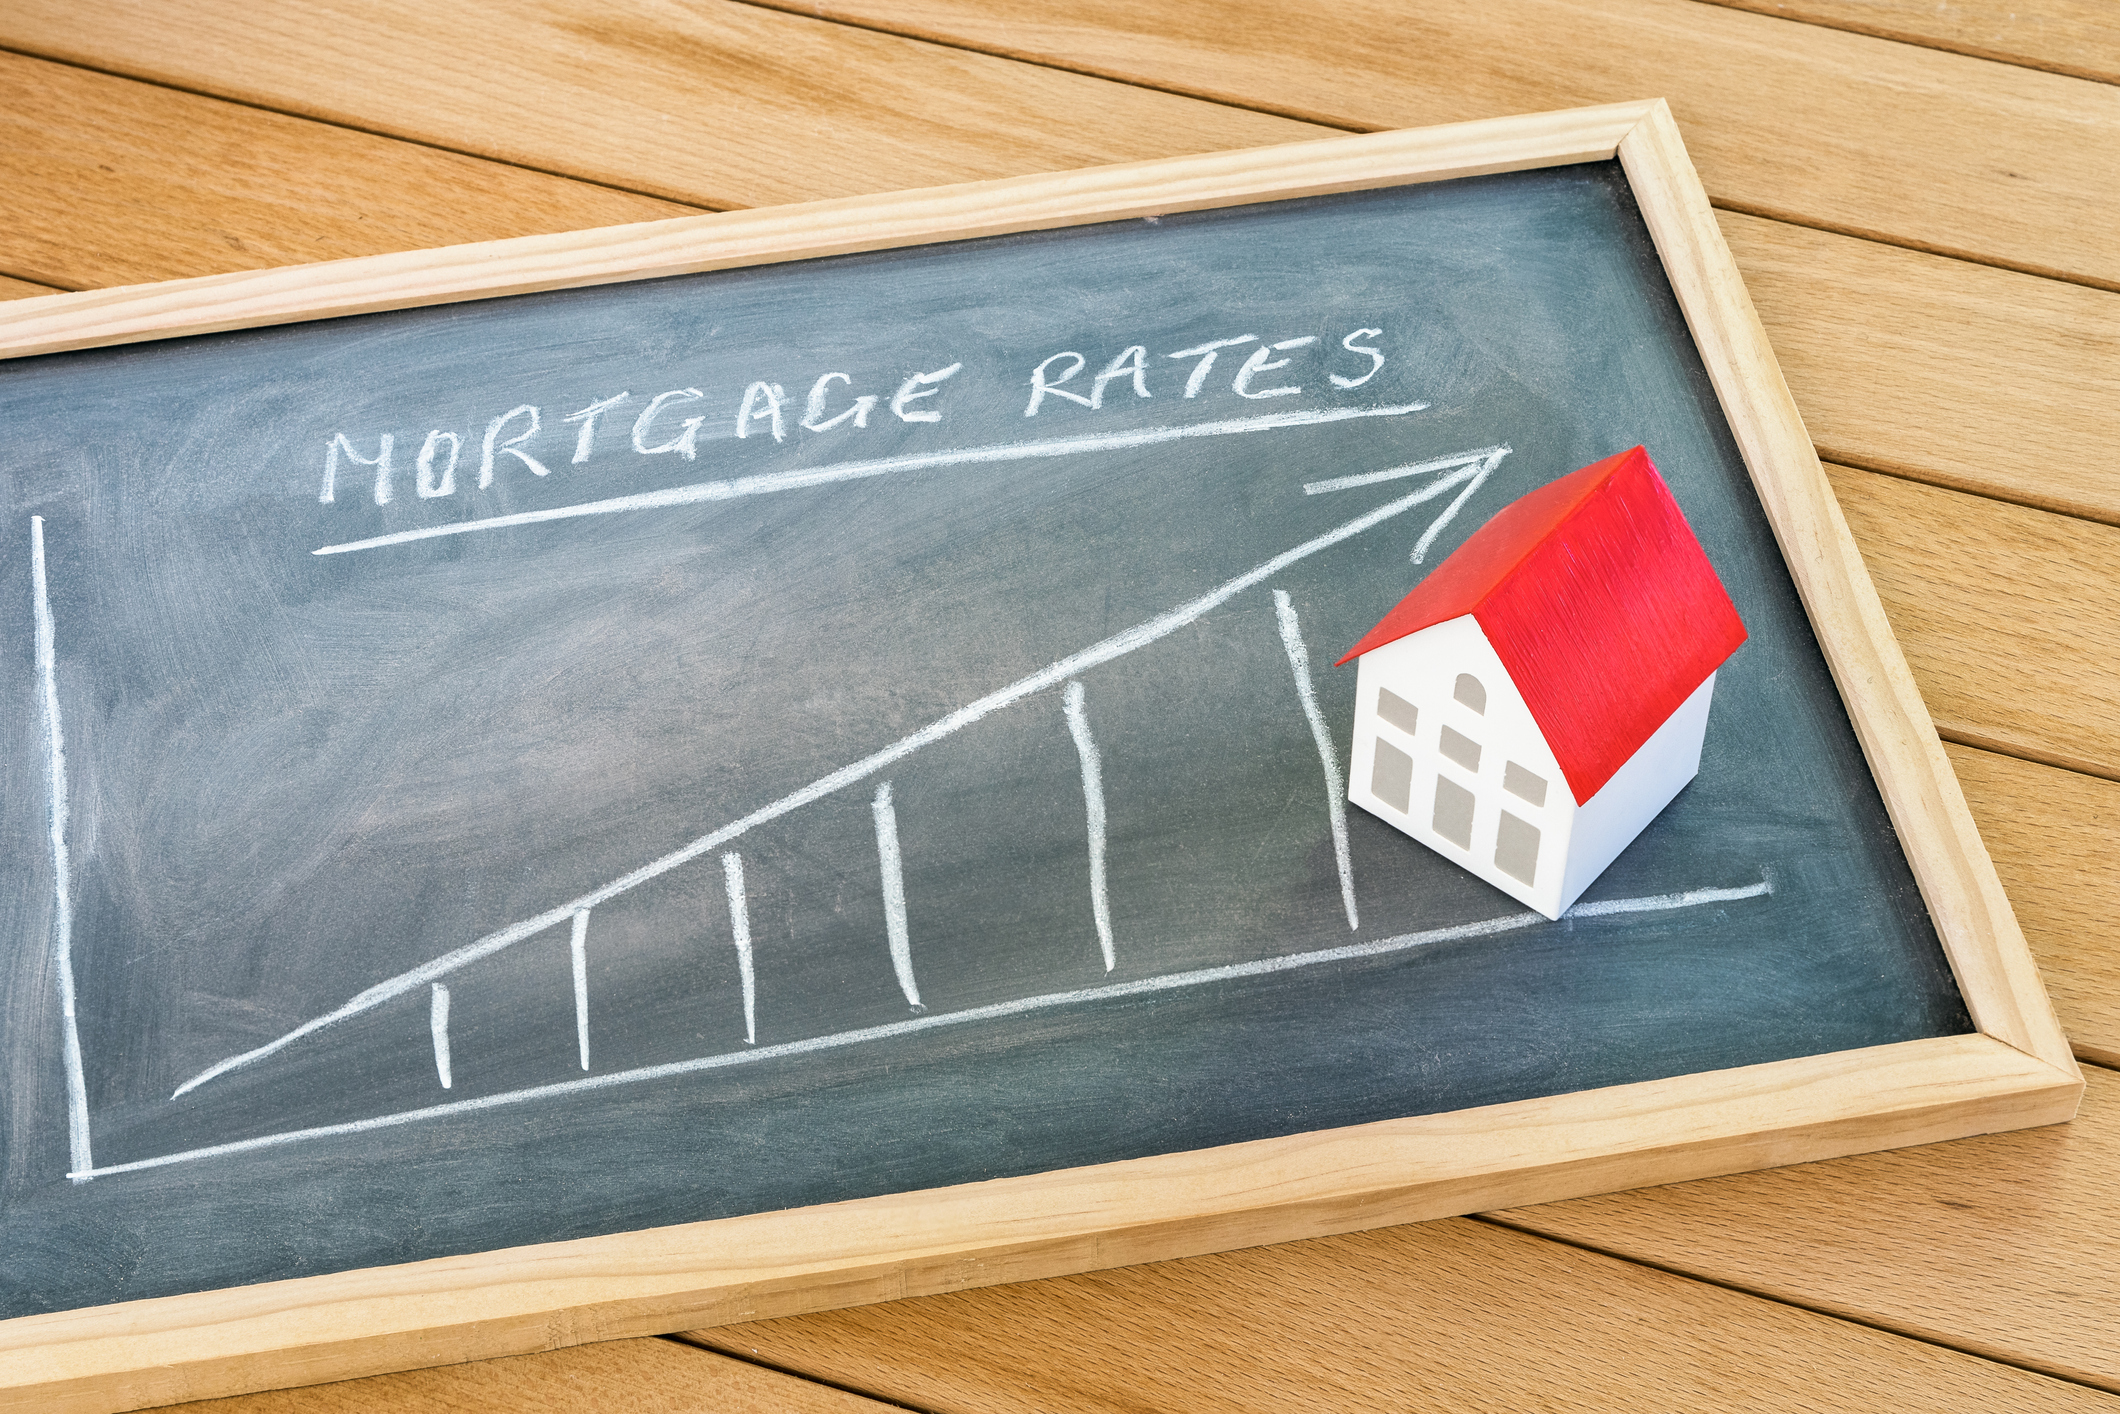 Graph representing the rise in mortgage interest rates drawn on a chalkboard lying on a wooden table. A model of a house with a red roof is on the chalkboard.